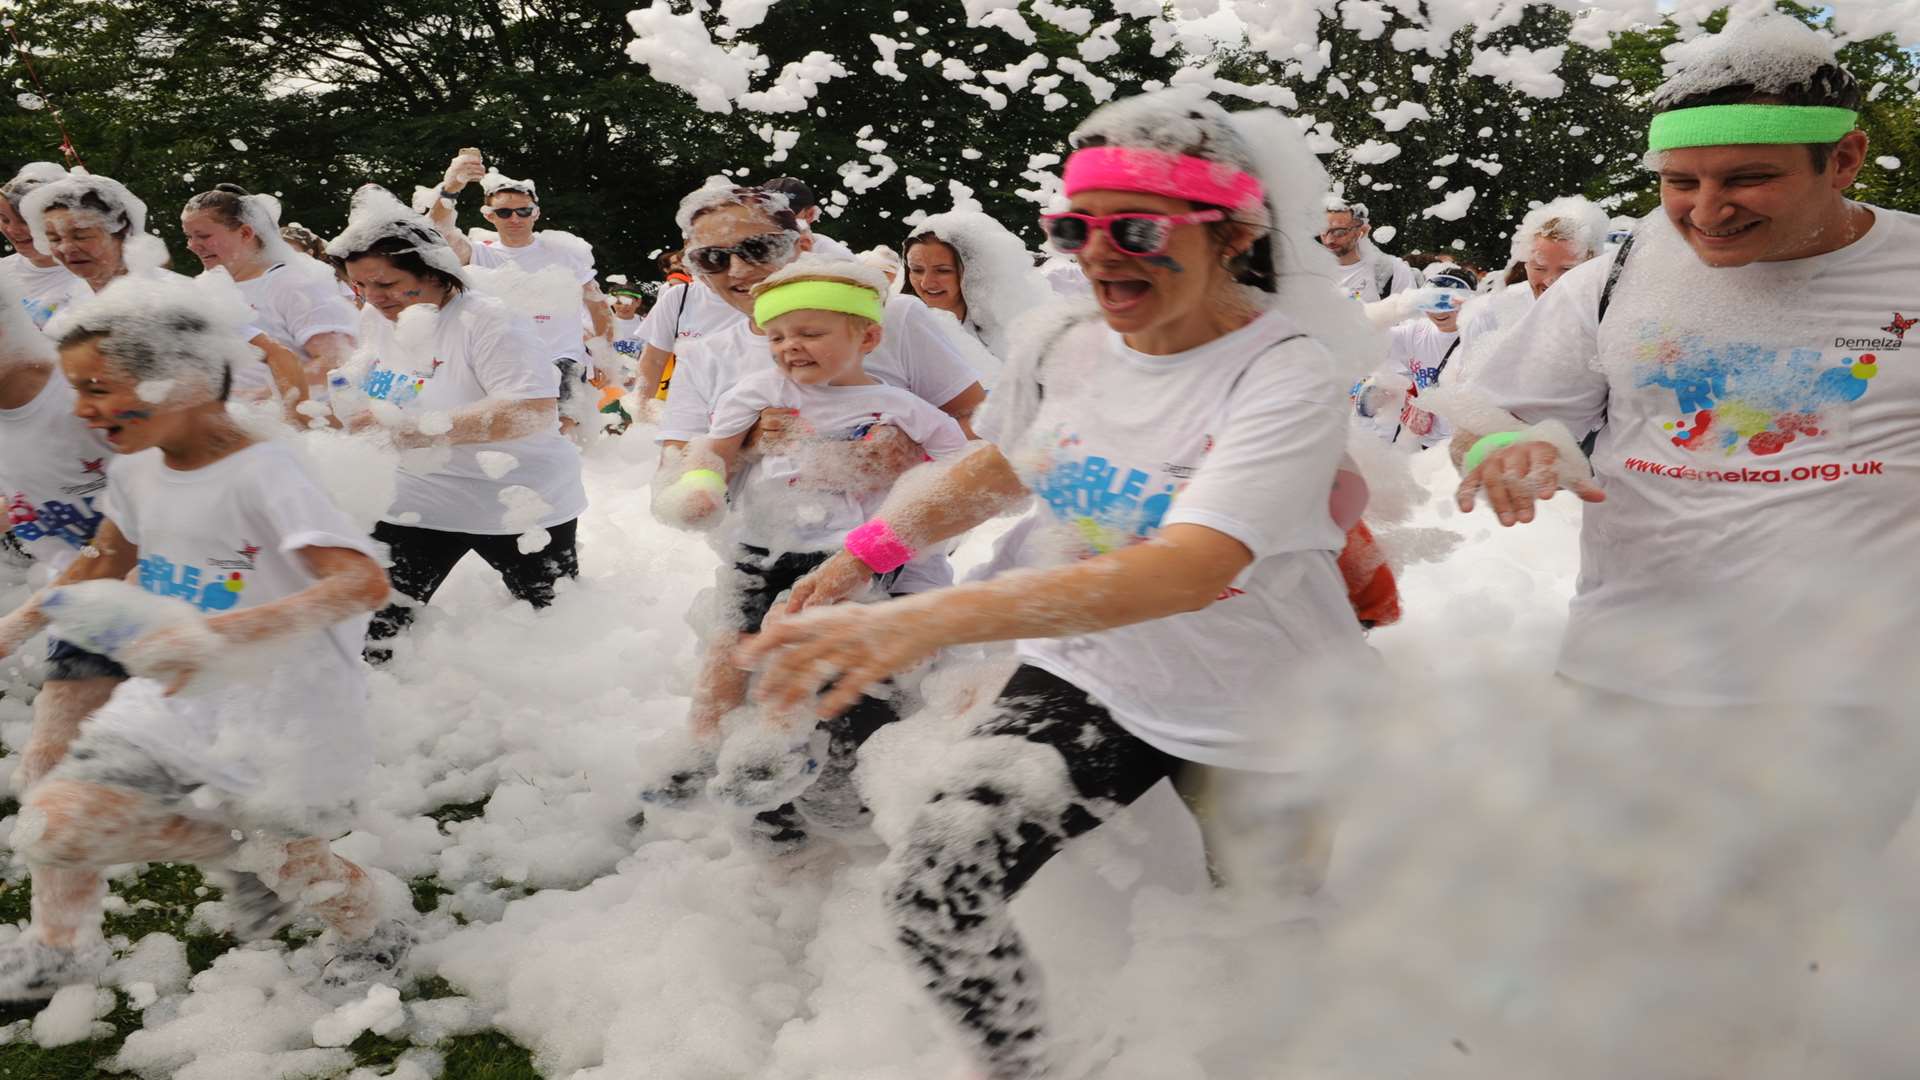 The group of fundraisers ran there way through towers of foam for Demelza.